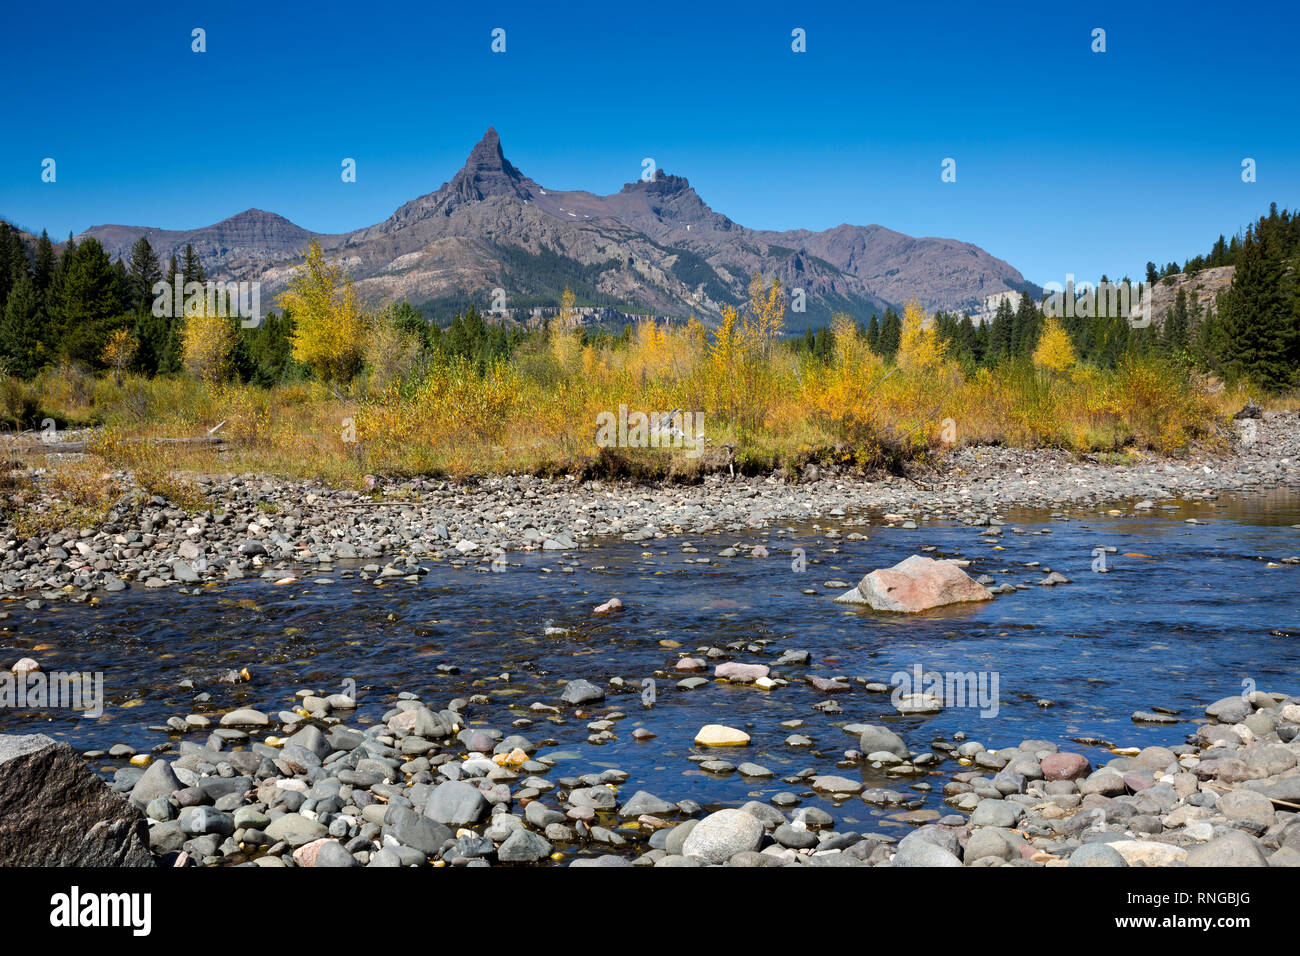 WYOMING - Fall color along the banks of the Clark Fork of the Yellowstone River with Pilot and Index Peaks beyond, in the Shoshone National Forest. Stock Photo